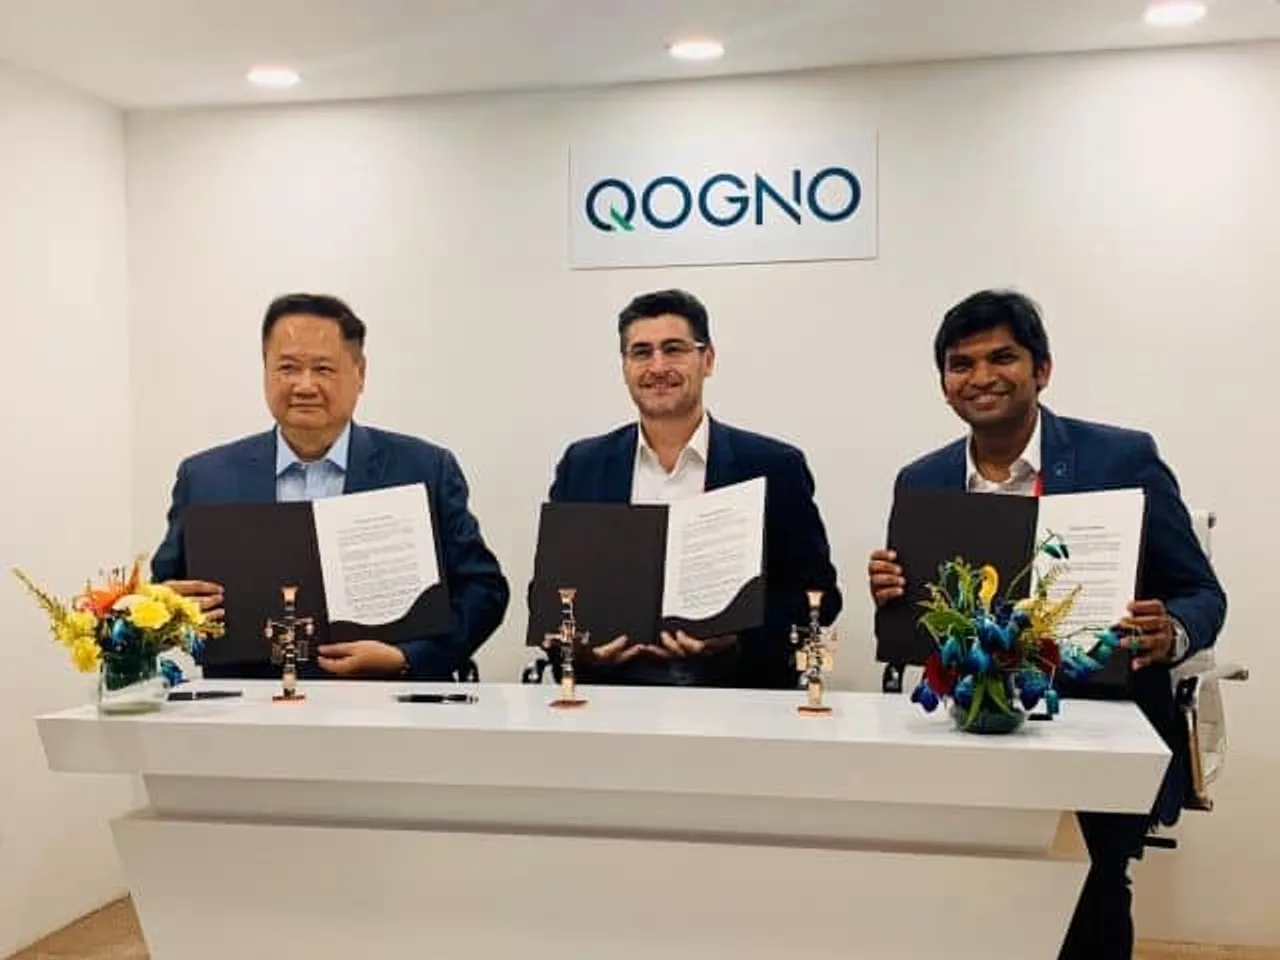 Qogno and TenX2 have partnered to enable 5G-ready connected solutions for urban & rural India